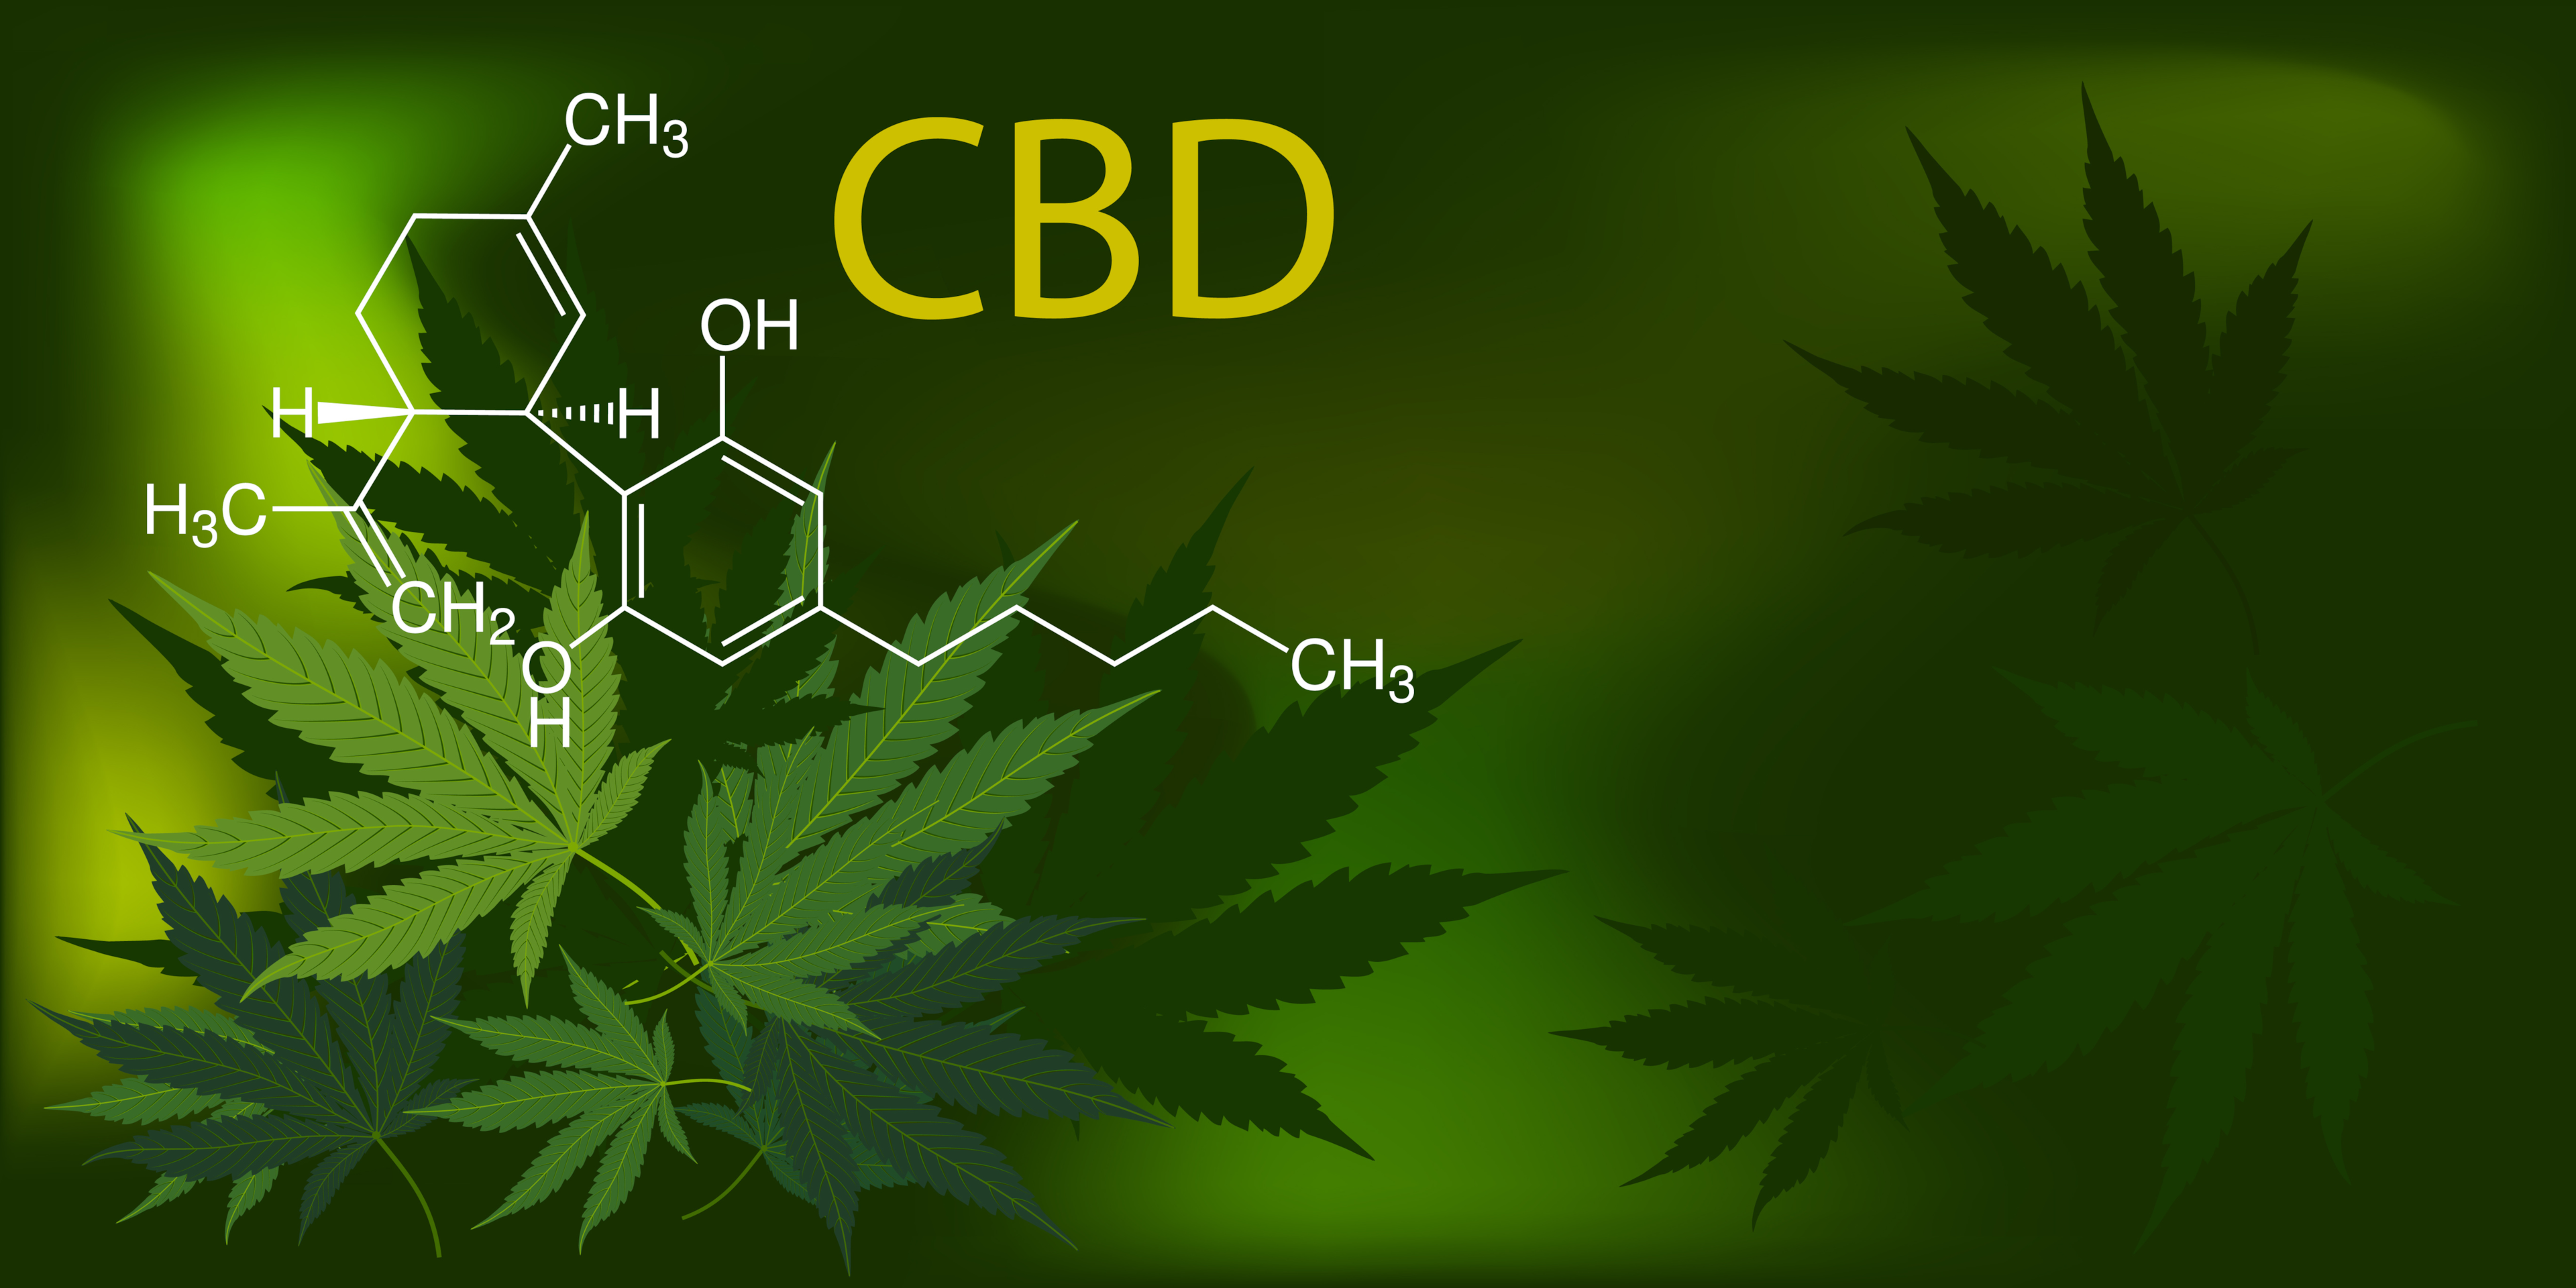 There are no definitive claims about CBD in this article, so it's unclear how it may affect blood tests or a tick bite, but we're looking at if it may cause muscle to heal and repair.  